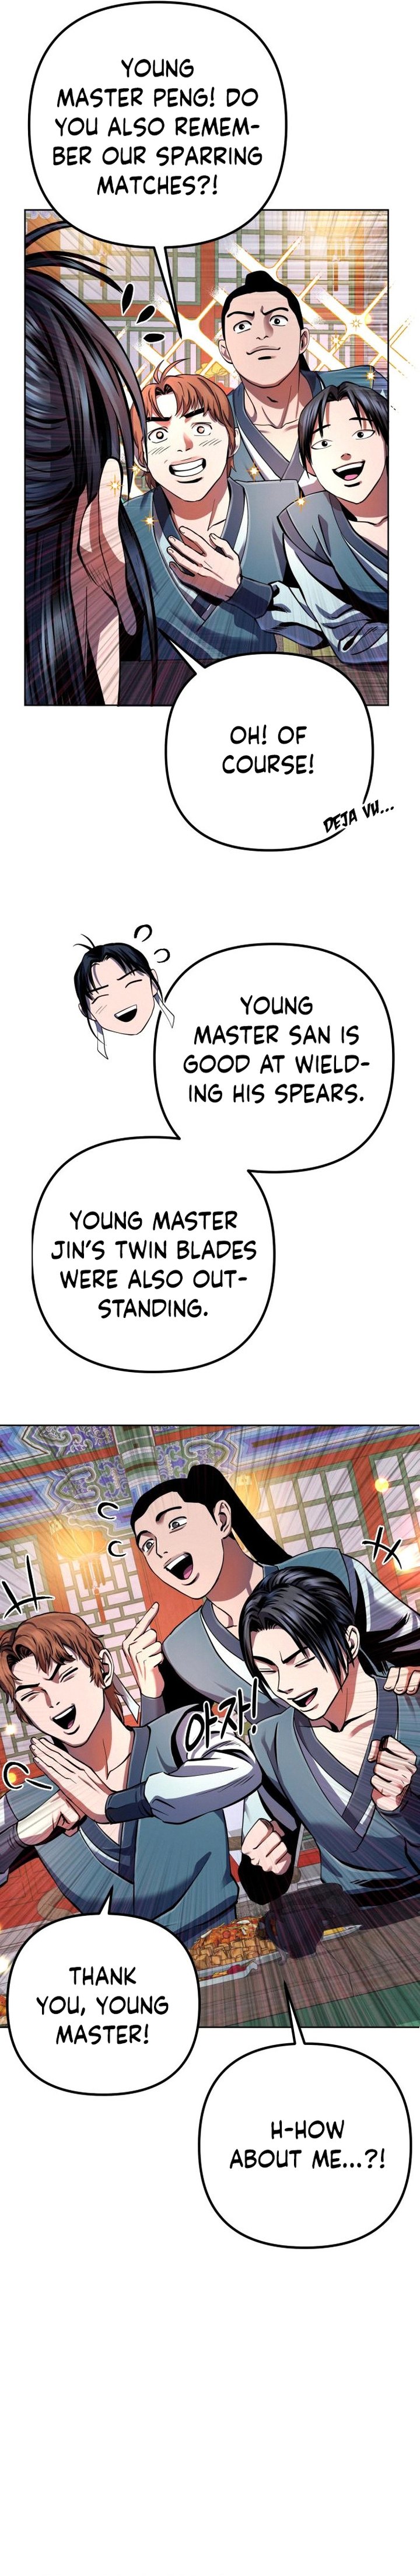 Revenge Of Young Master Peng 35 8